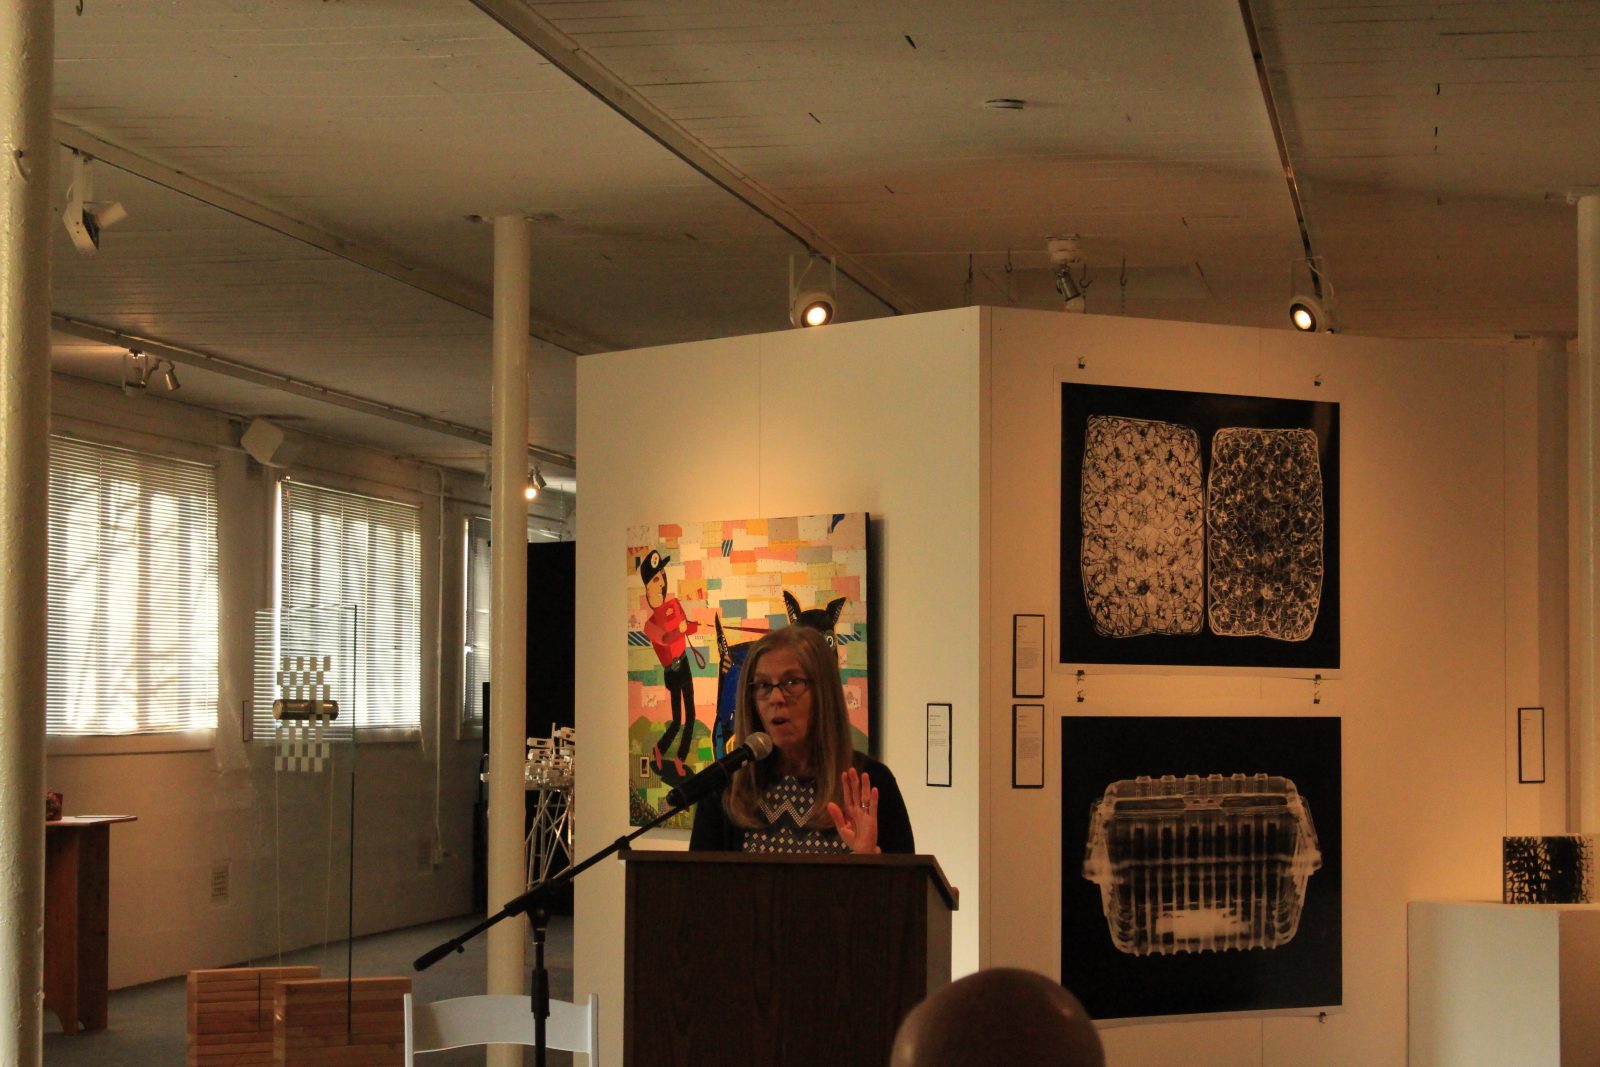 PHOTOS The Dairy Barn Arts Center Hosts First Spoken and